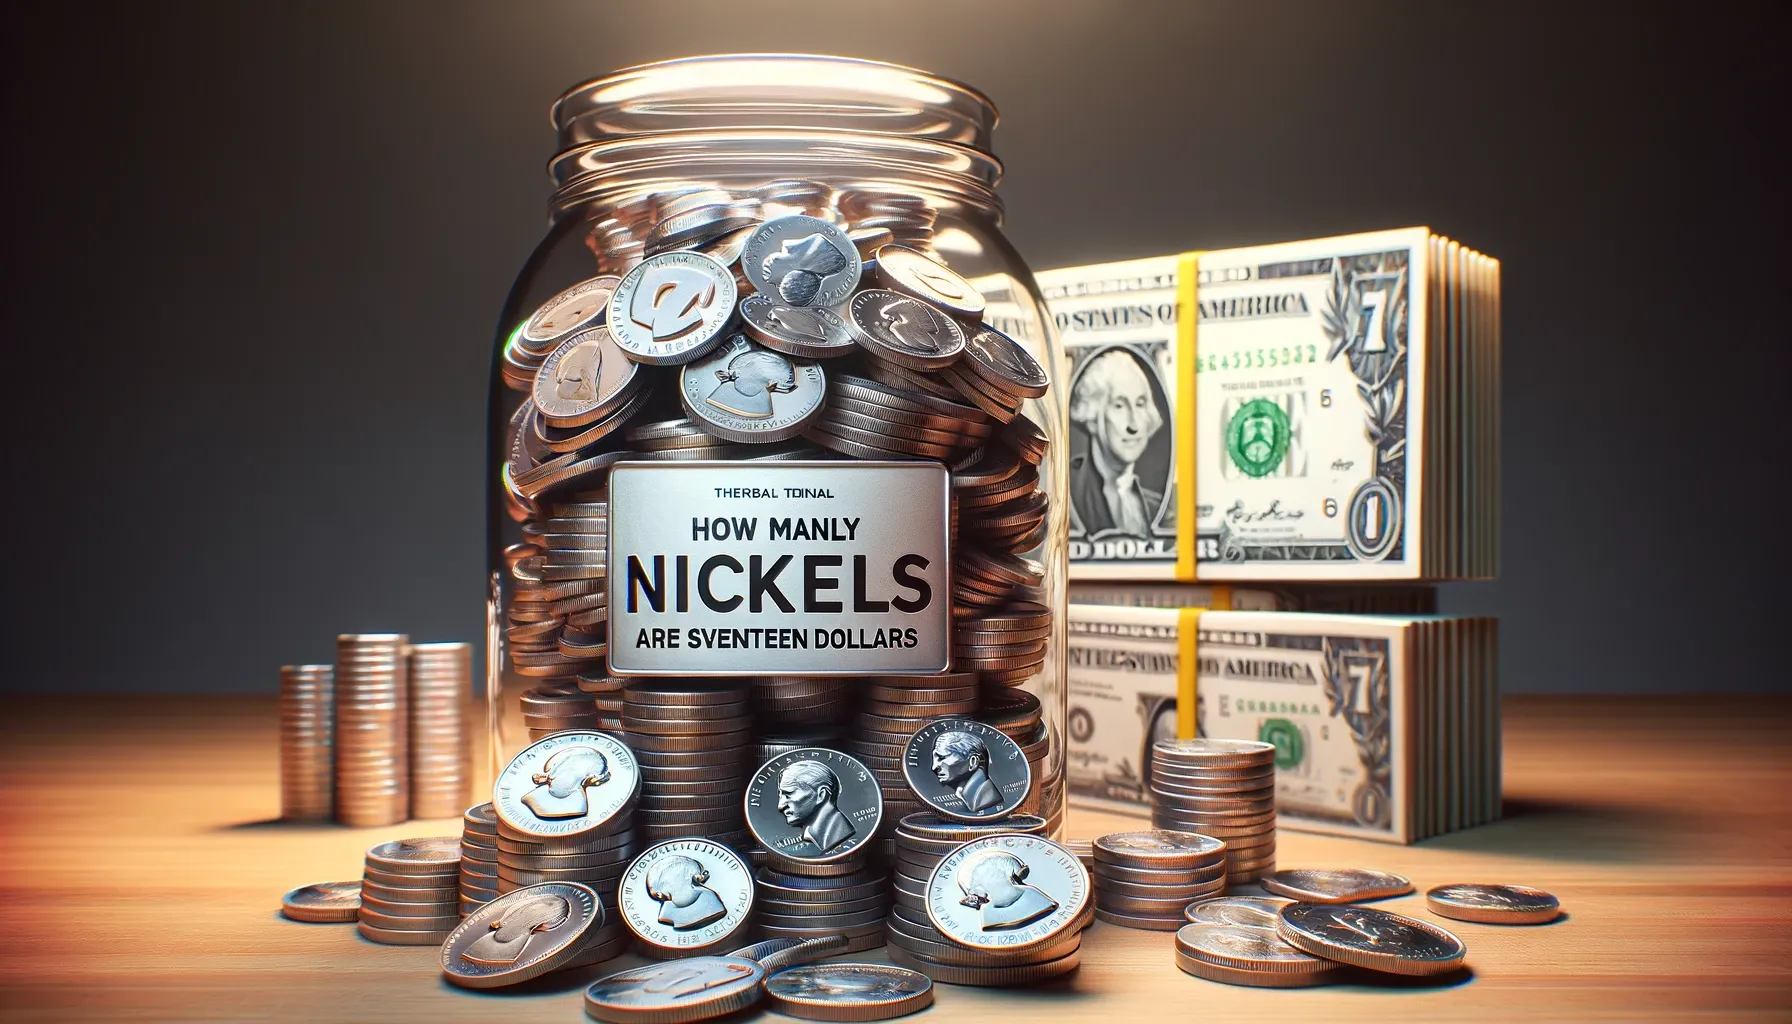 How Many Nickels Are There in Seventeen Dollars